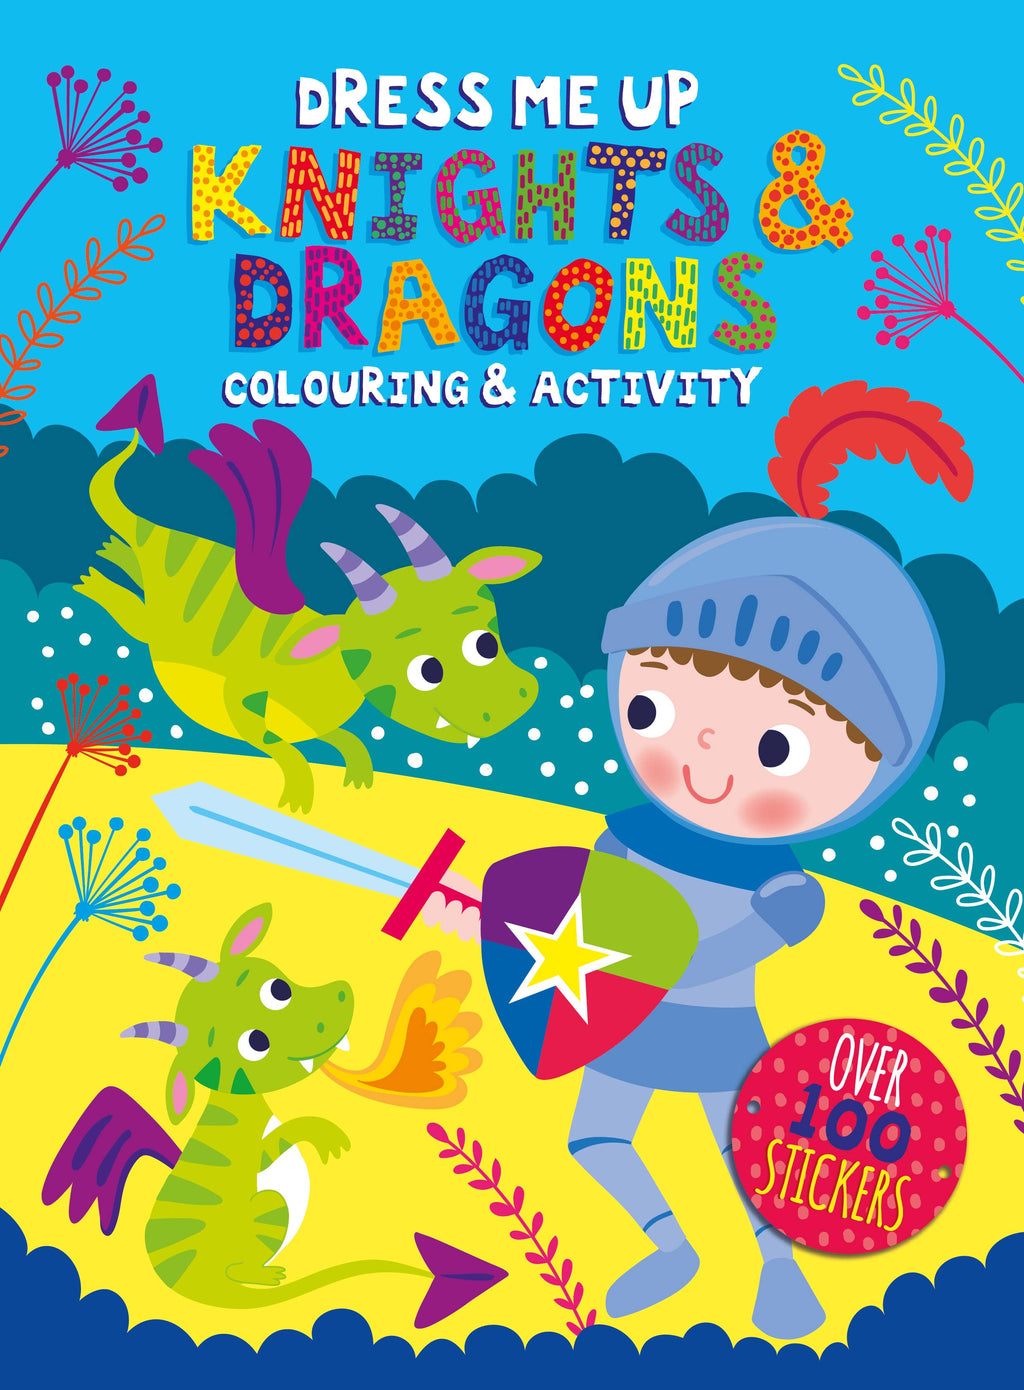 Dress Me Up Colouring and Activity Book - Knights & Dragons - Elves & the Shoemaker